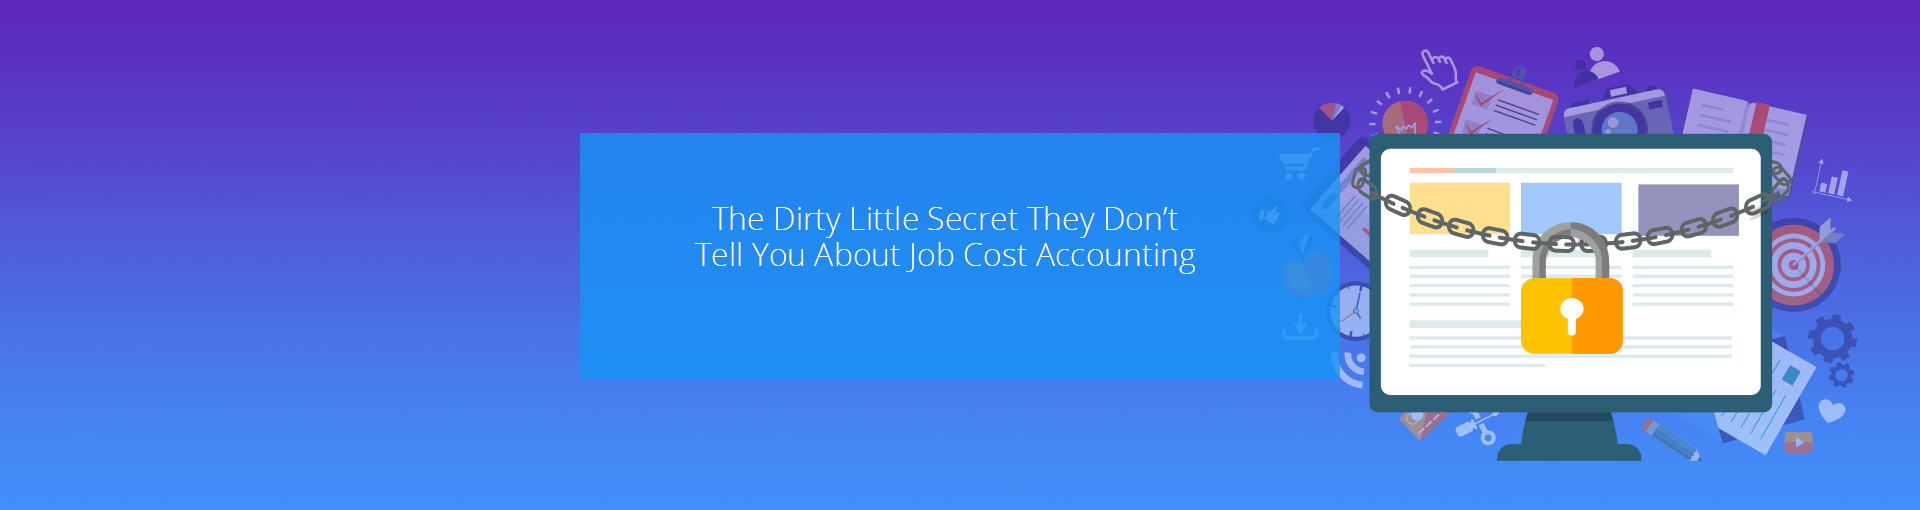 The Dirty Little Secret They Don’t Tell You About Job Cost Accounting Featured Image